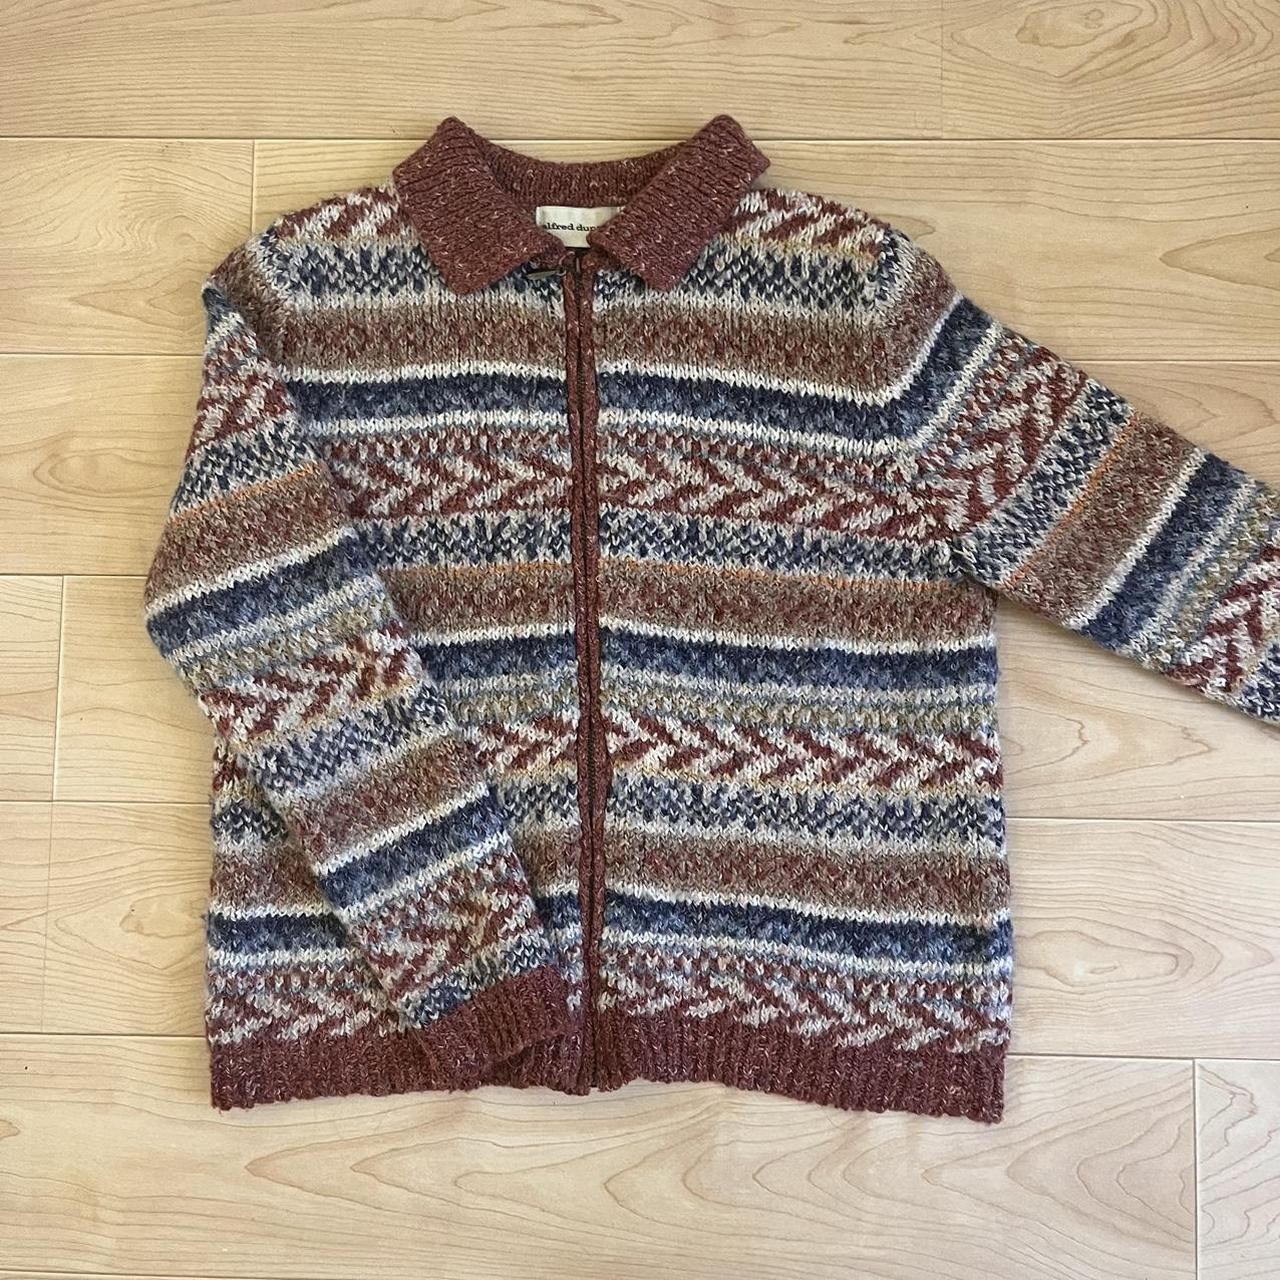 item listed by needfulthingsthrift